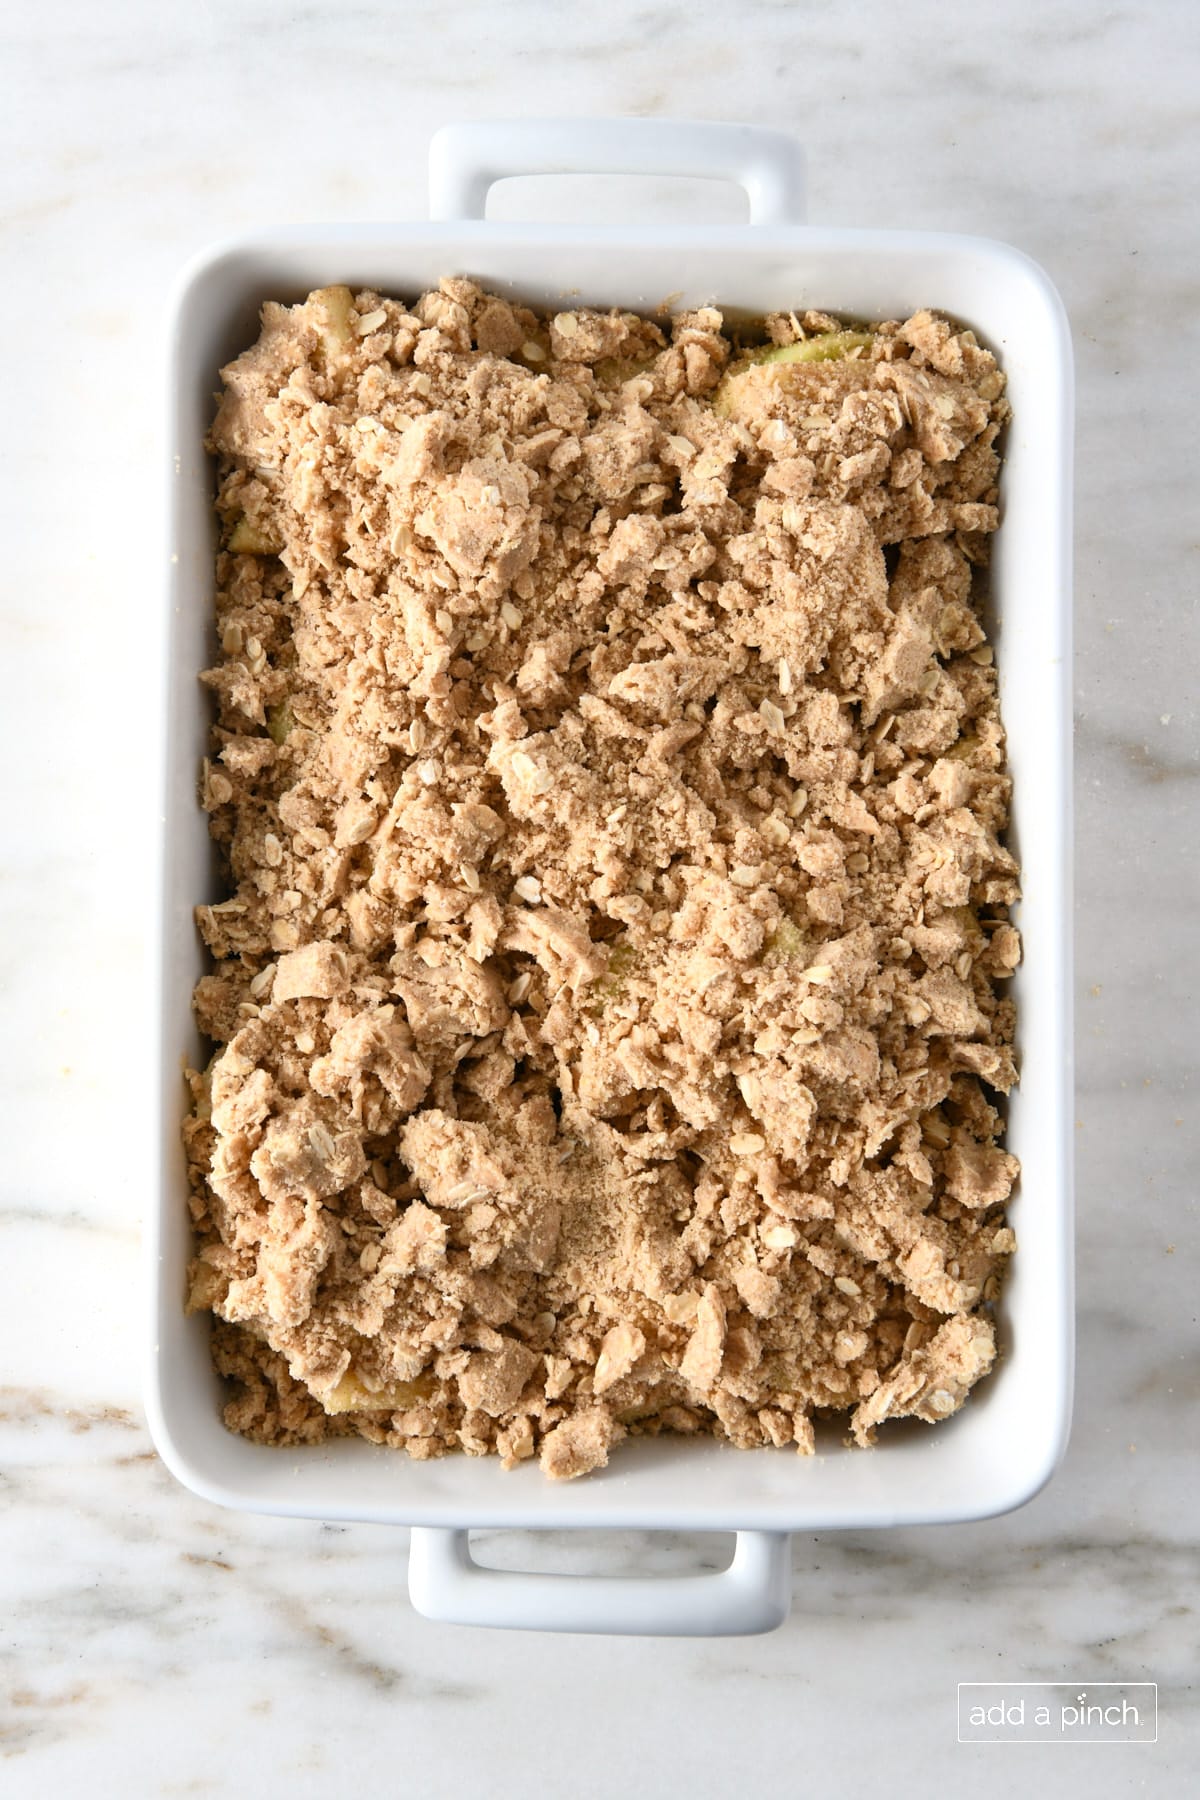 White baking dish on marble countertop holds unbaked apple crisp with apple slice peeking out of oat streusel topping.